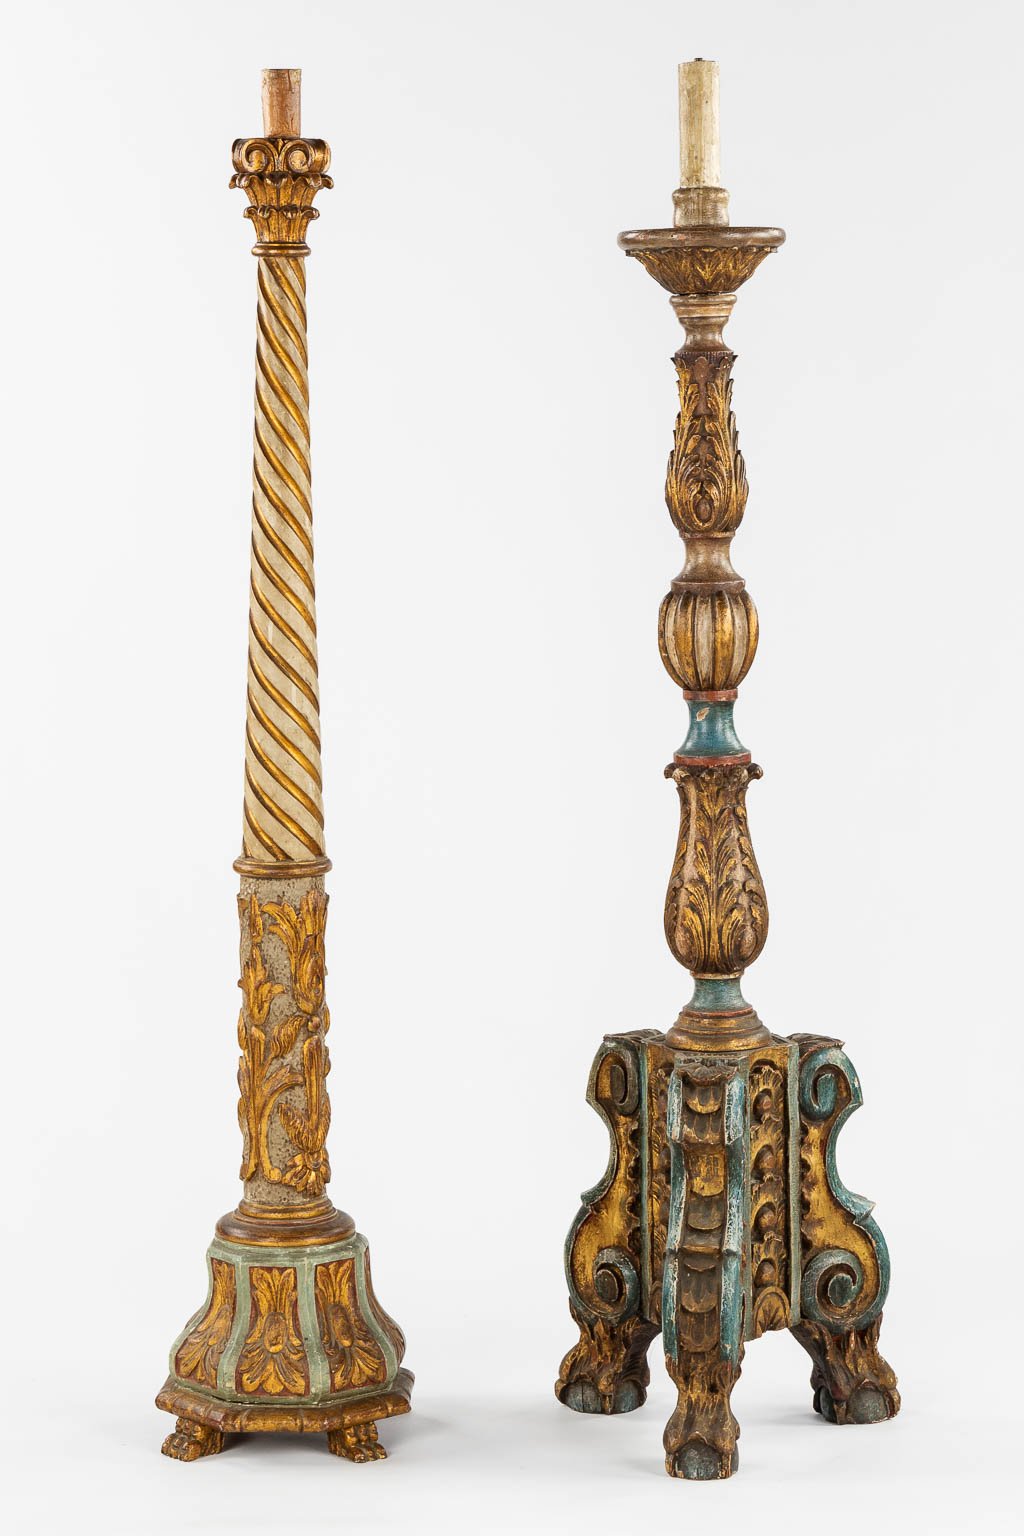 A pair of standing lamps, sculptured and patinated wood. Circa 1900. (H:144 cm)